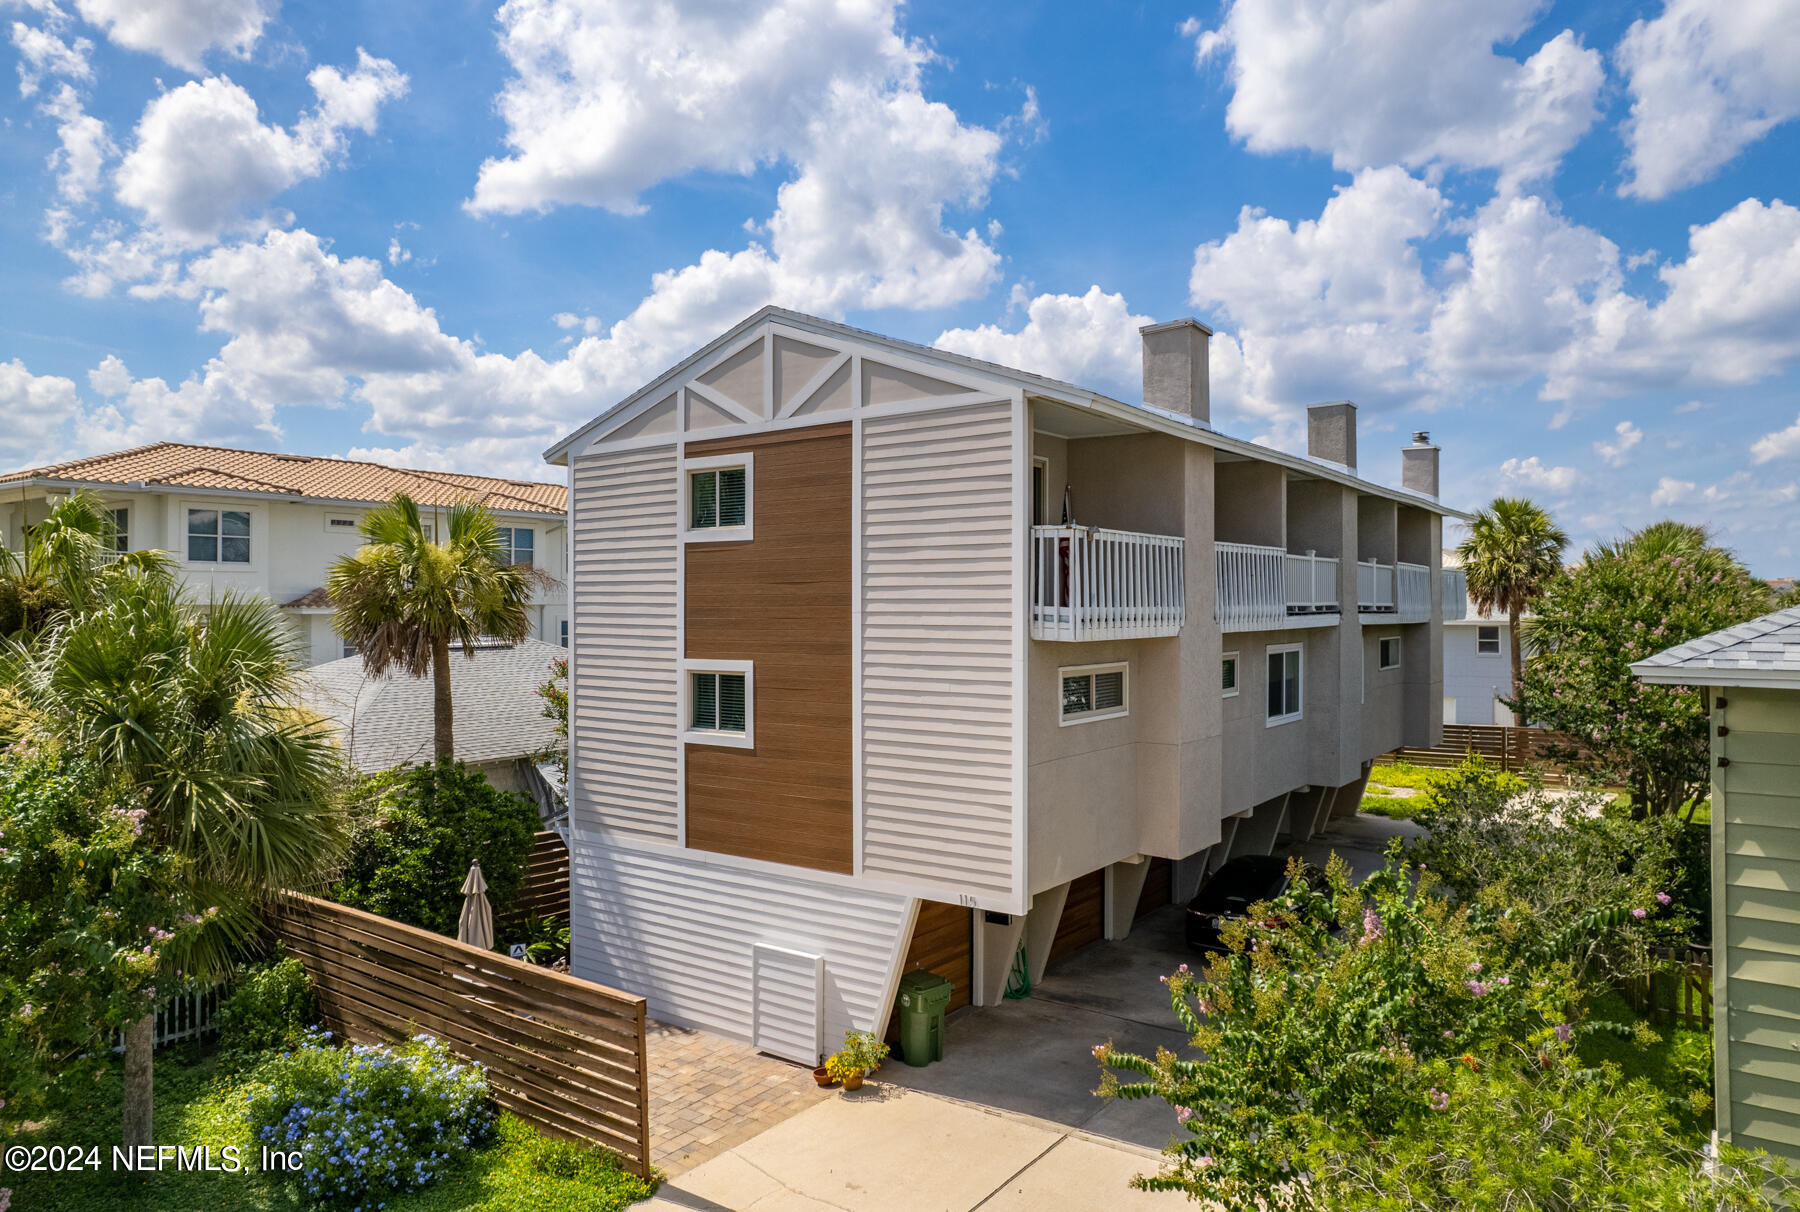 Jacksonville Beach, FL home for sale located at 115 15th Avenue S Unit C, Jacksonville Beach, FL 32250